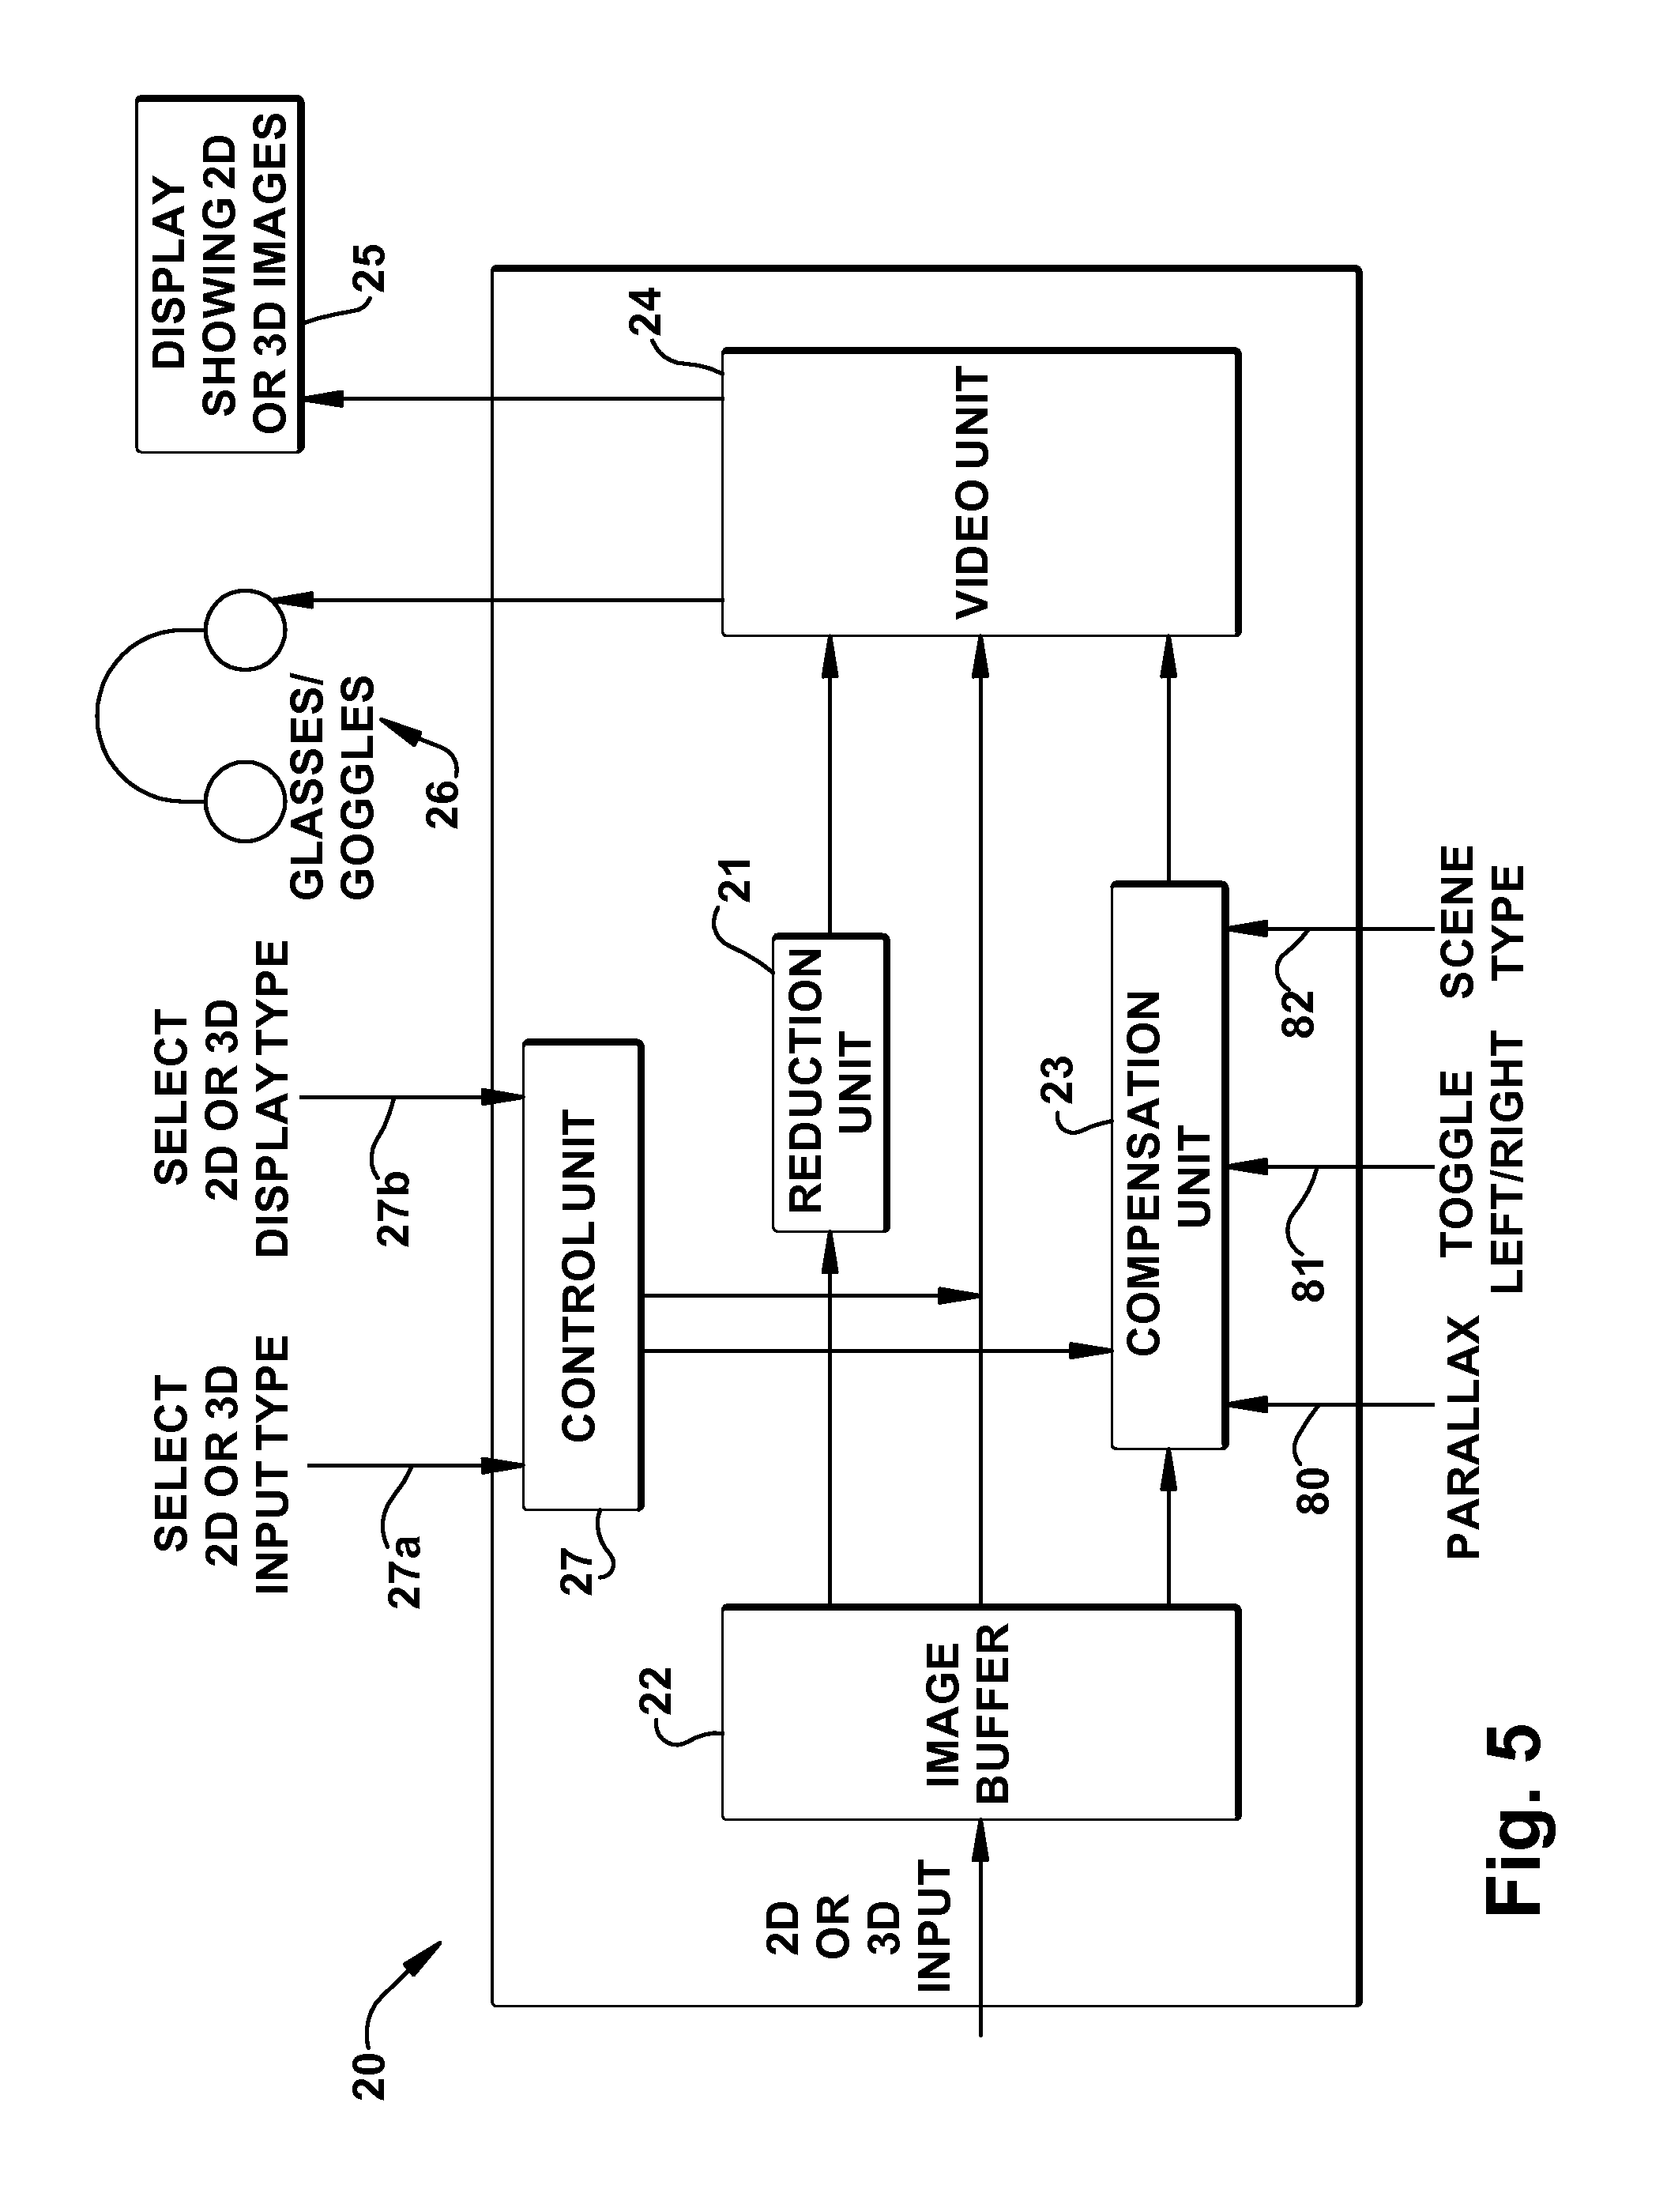 Methods and systems for 2D/3D image conversion and optimization